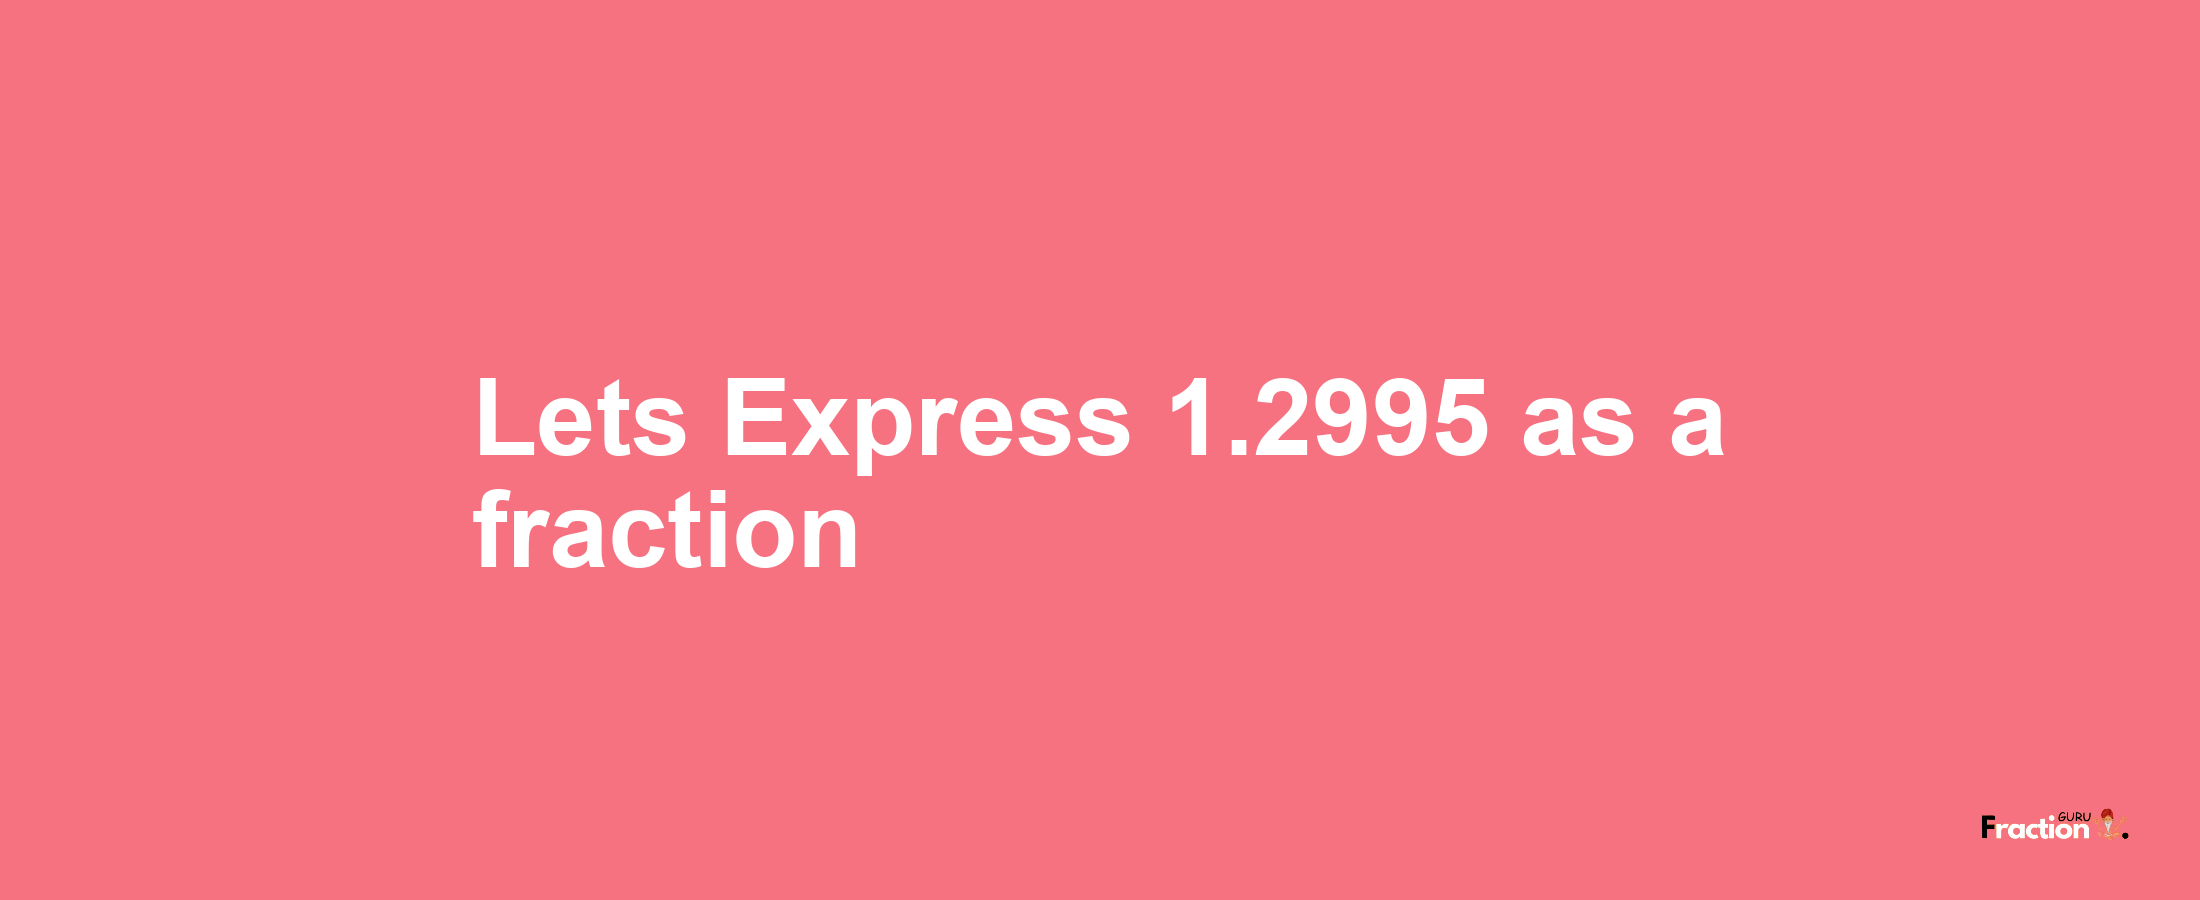 Lets Express 1.2995 as afraction